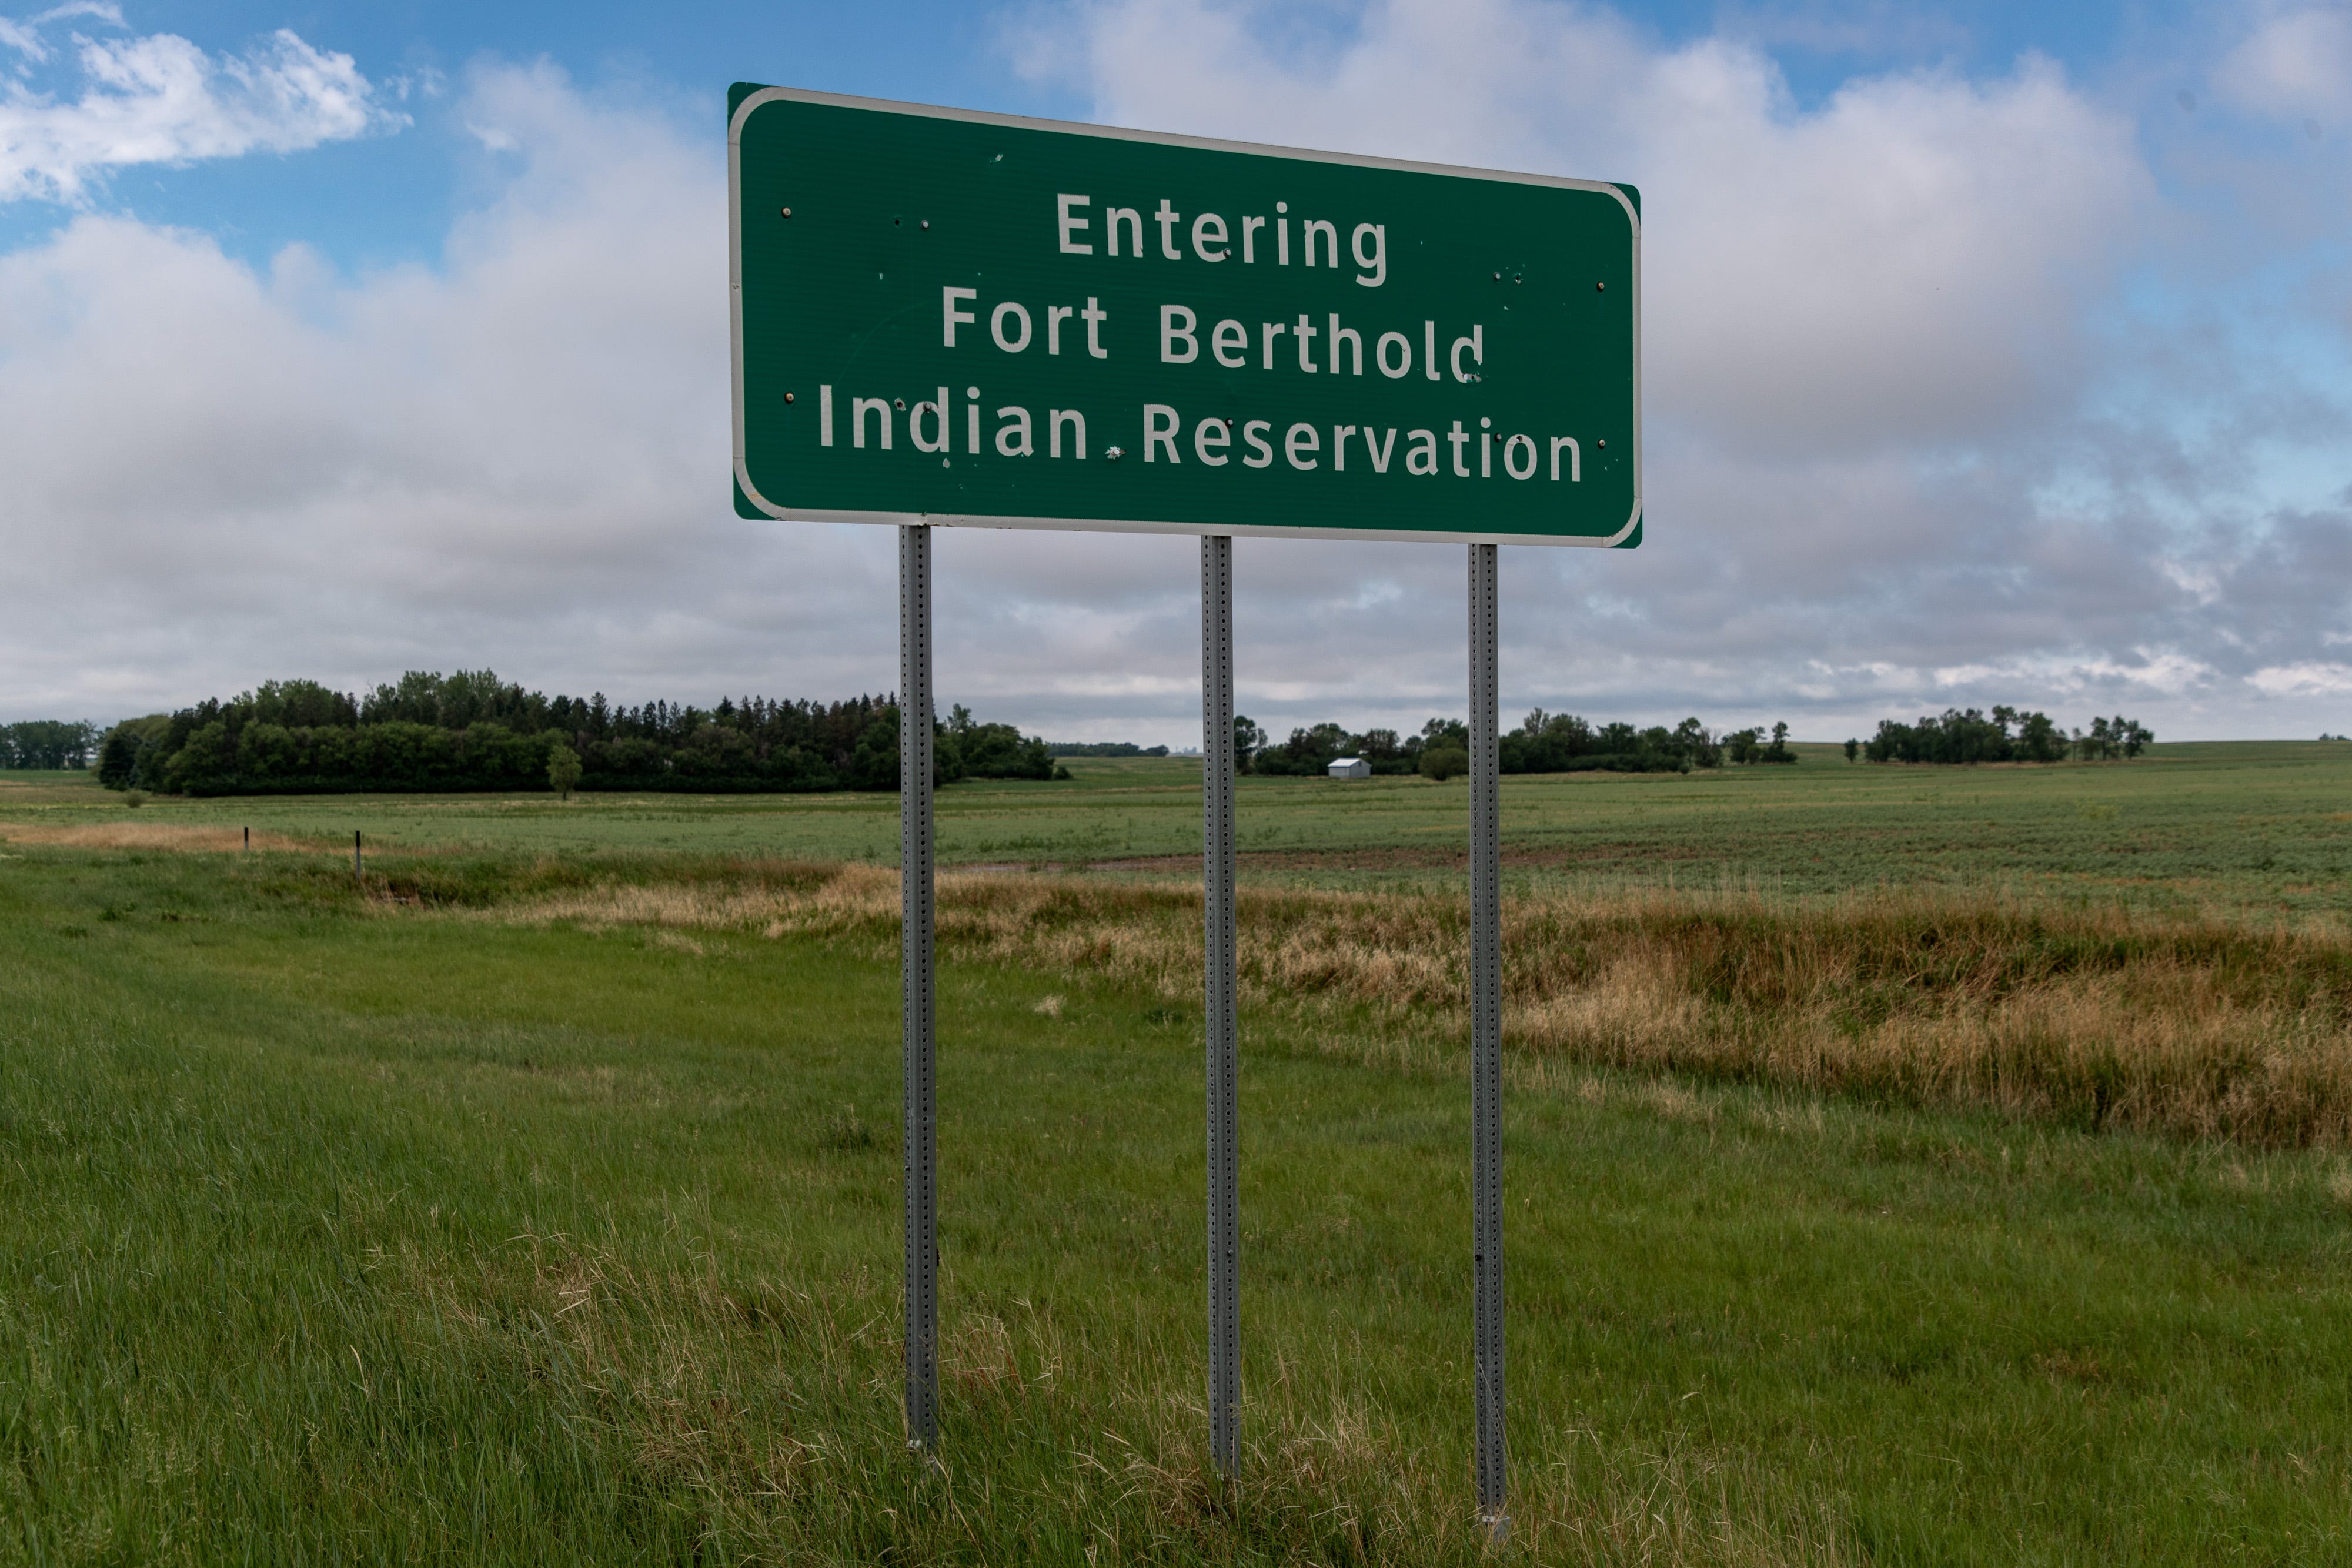 A sign along Highway 1804 heading west into the Fort Berthold Indian Reservation in North Dakota. June 27, 2021